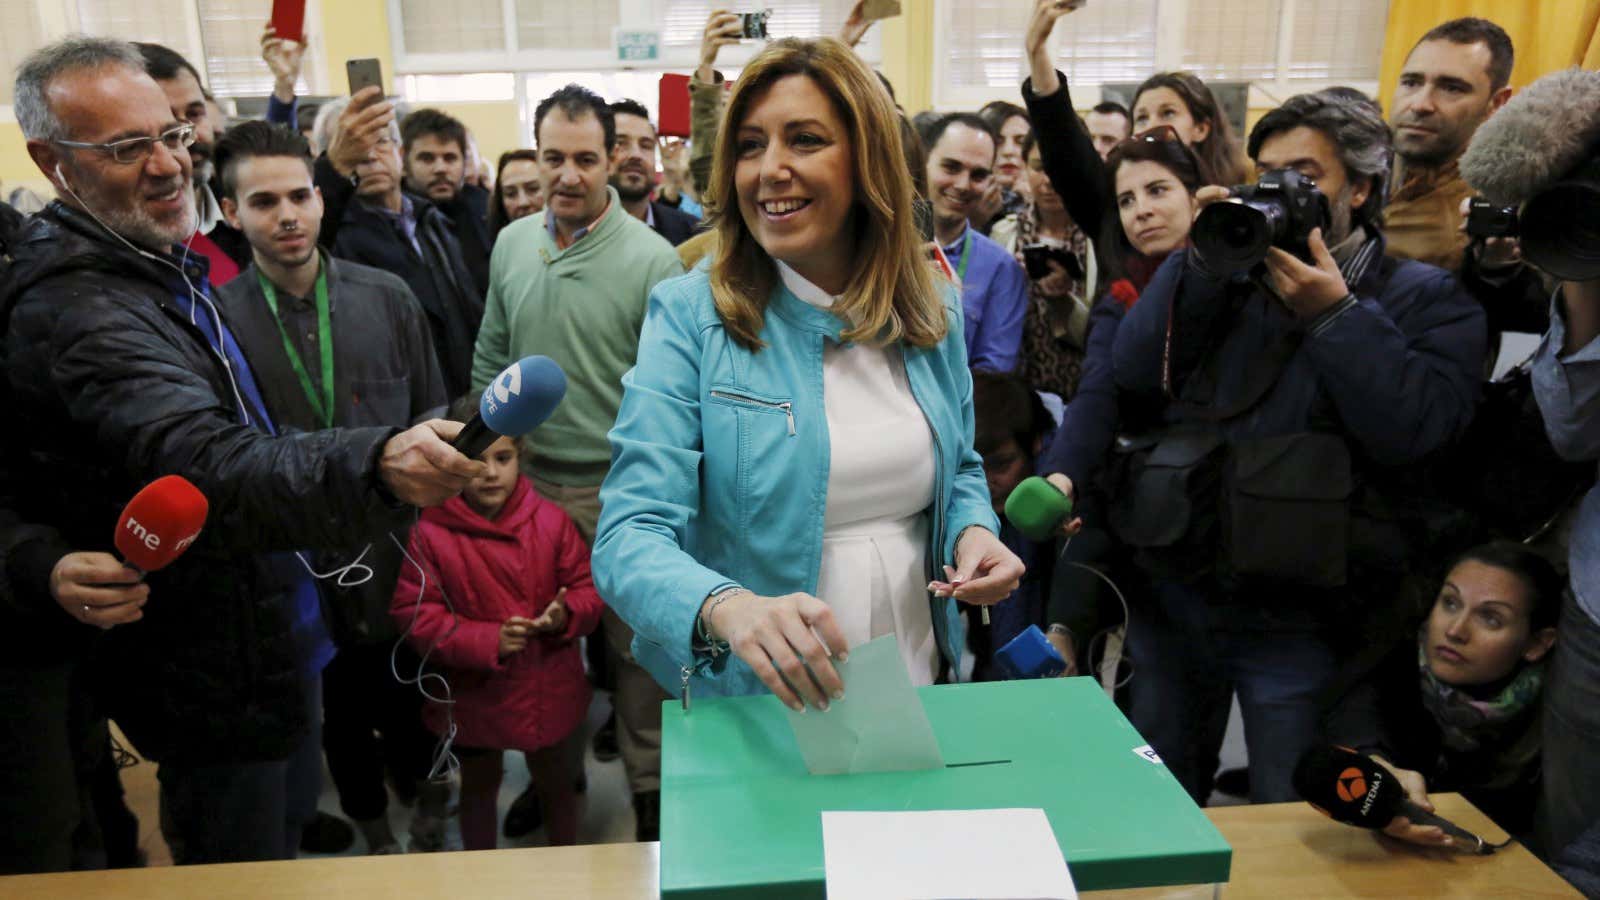 Susana Diaz, a candidate and voter in Andalusia, is one of a wave of new women politicians.